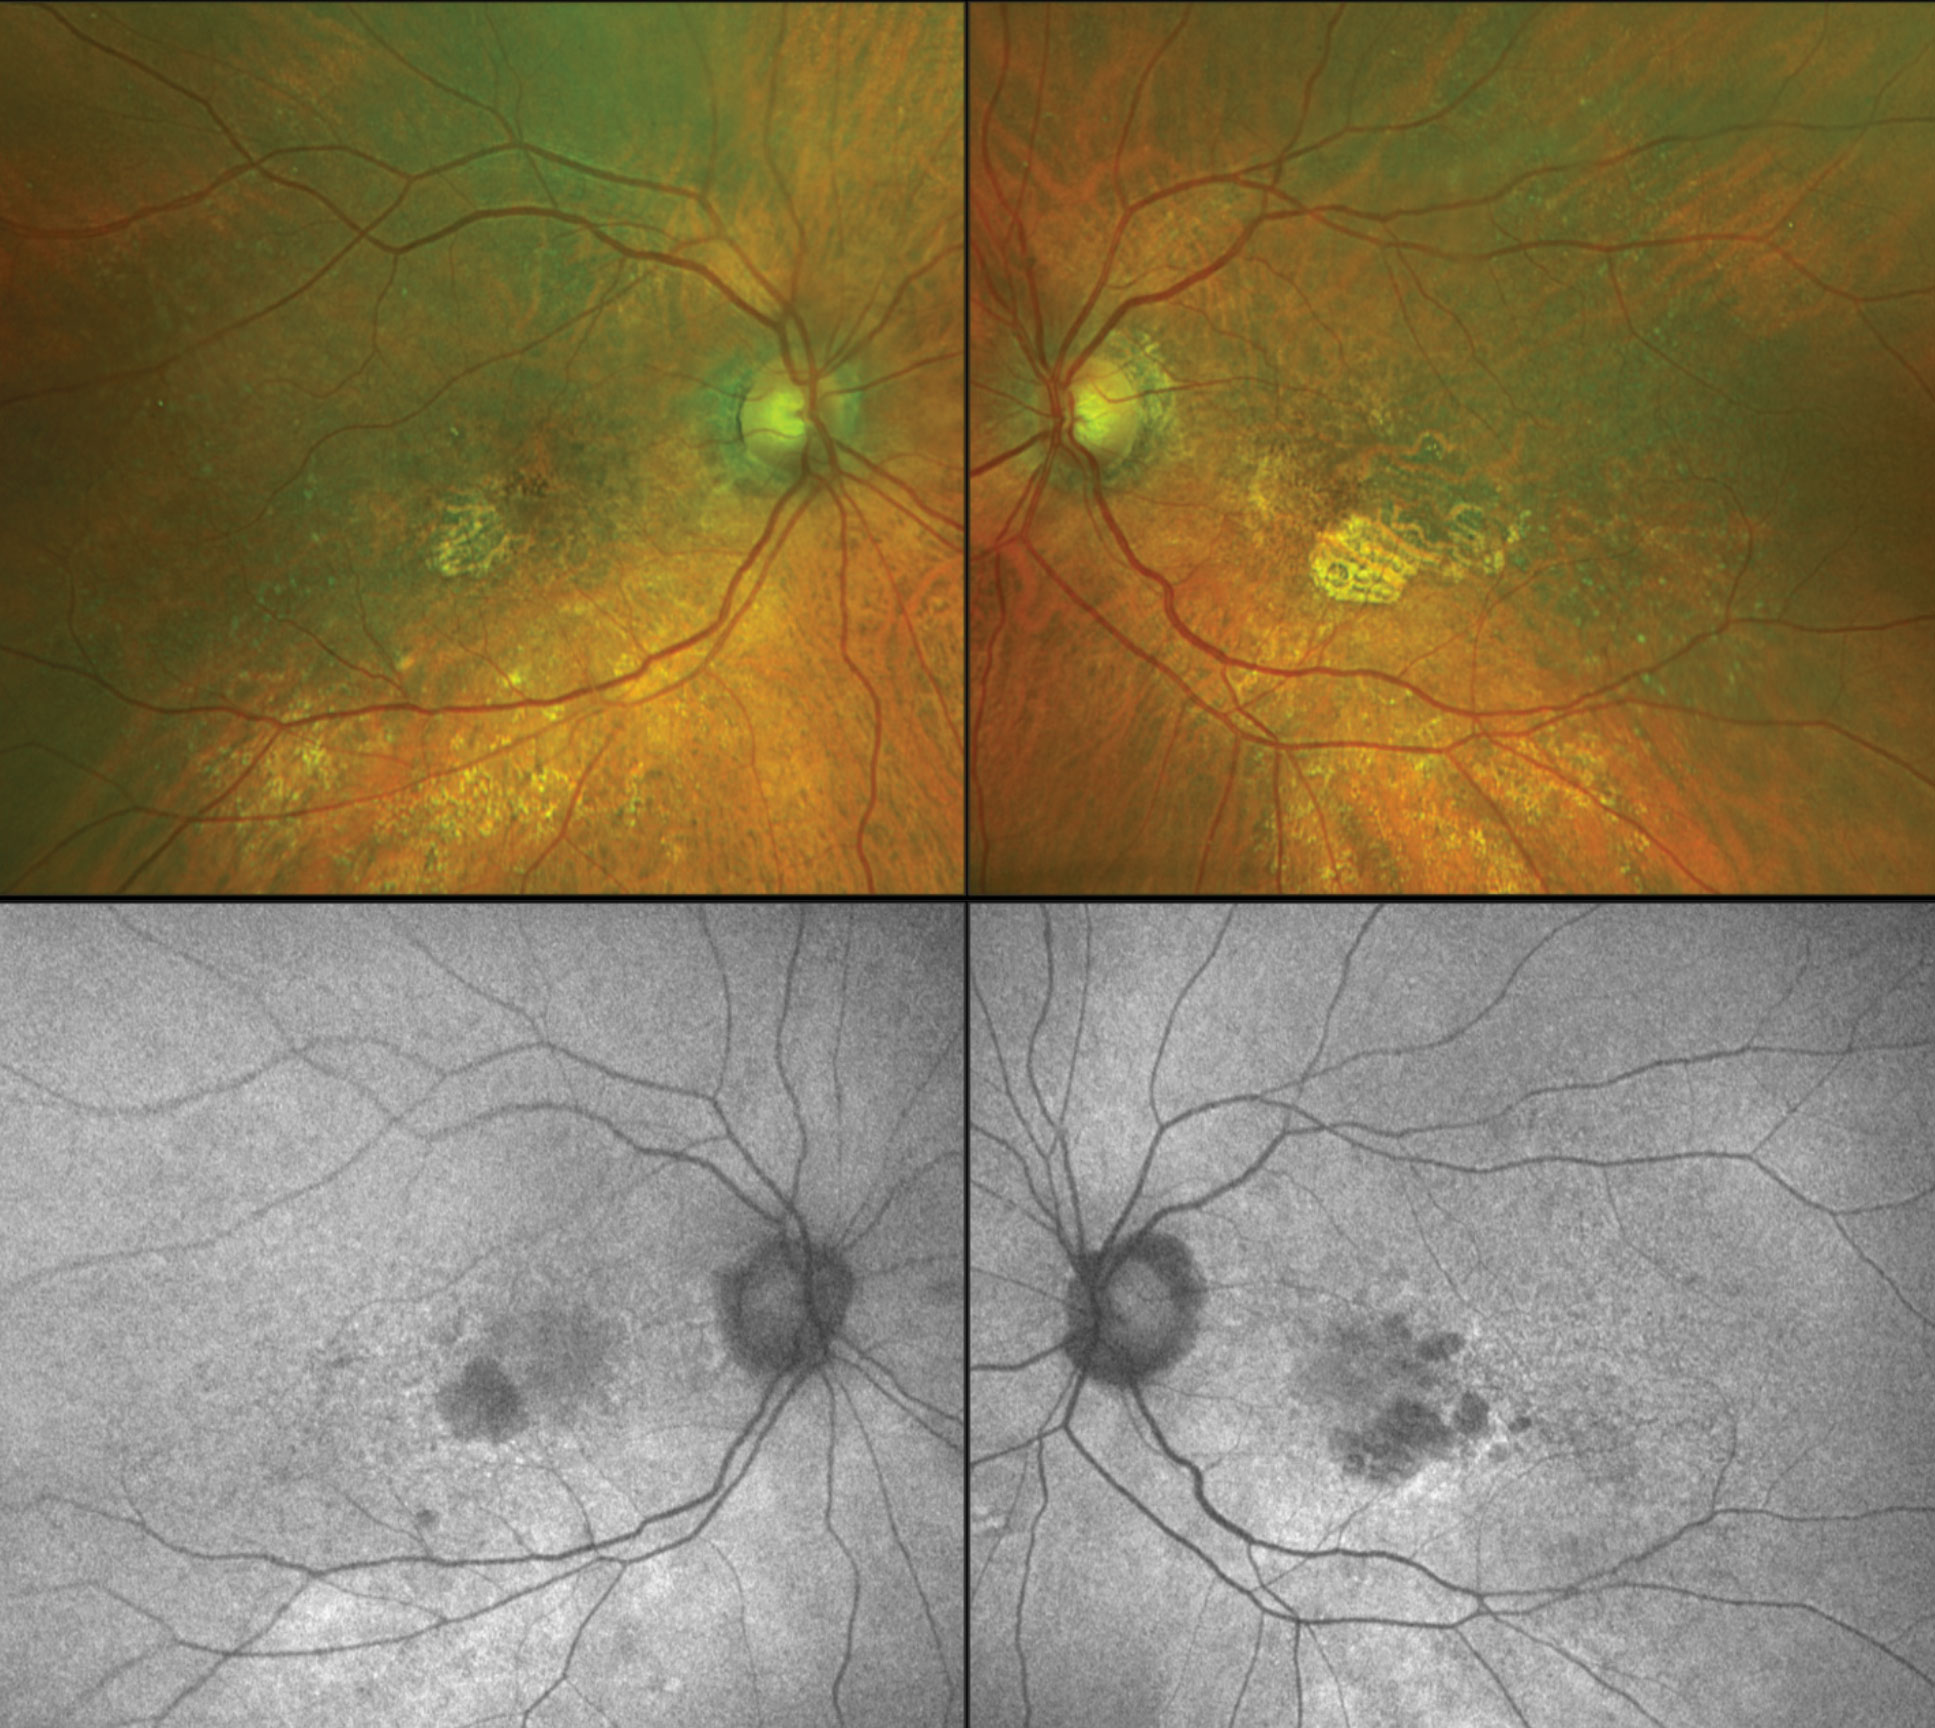 Color fundus images (top) and fundus autofluorescence (bottom) of a patient with geographic atrophy (GA) from macular degeneration OU. The SAGA study is exploring modified vitamin A treatment for GA patients such as seen here.